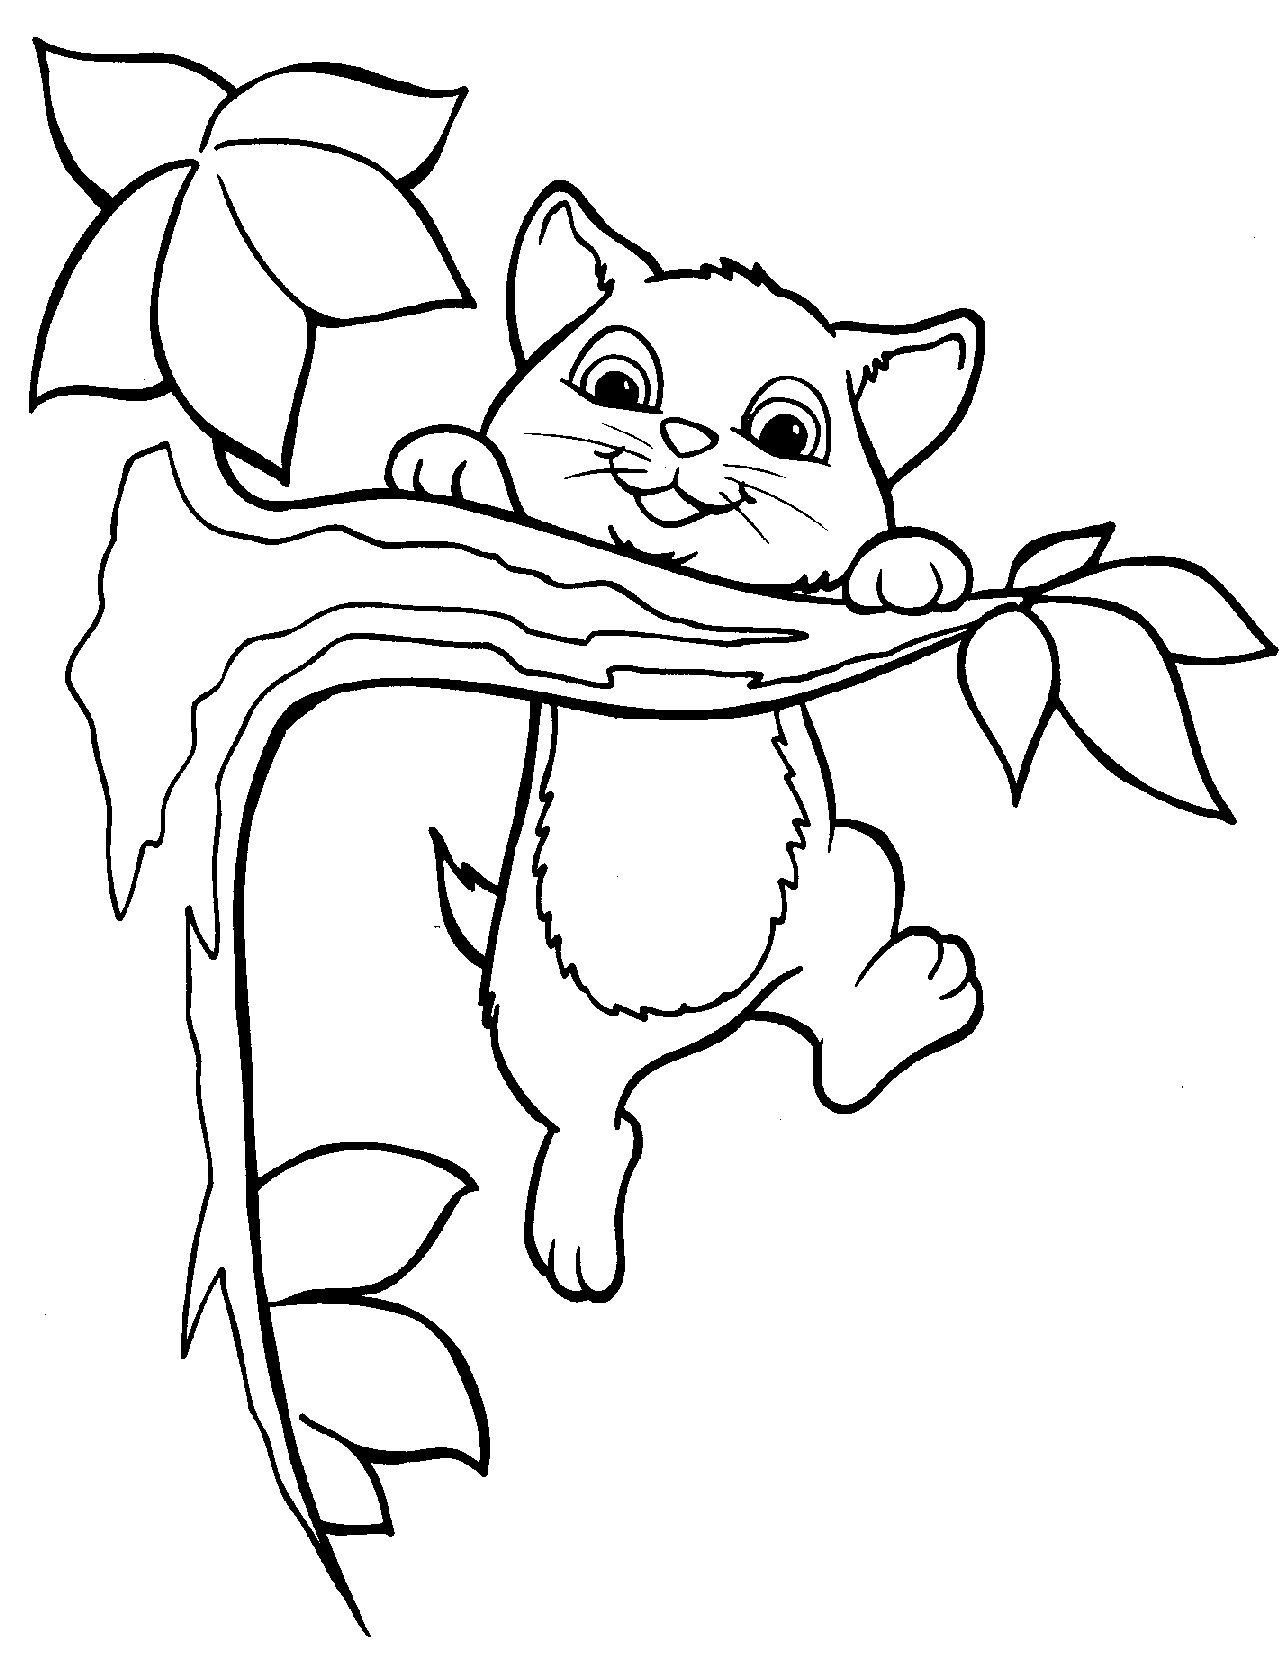 coloring pages cute cats cat color pages printable cat coloring sheets animal pages cats cute coloring 